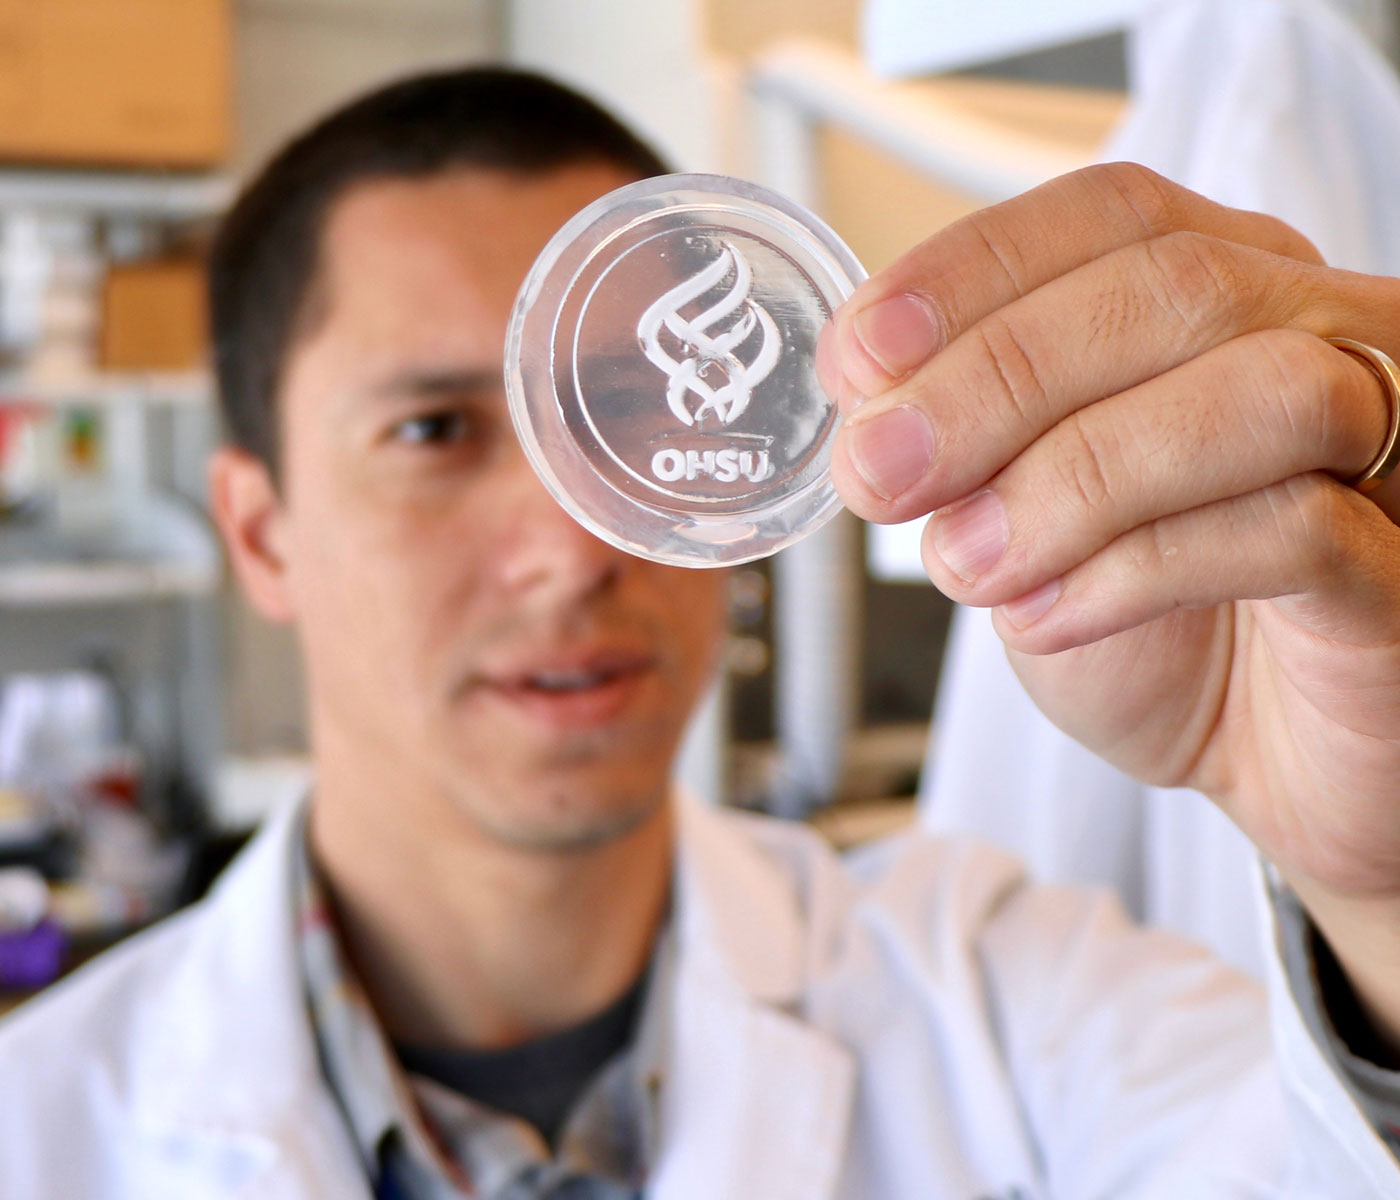 Researcher shows an engineered material that replicates human bone tissue in the shape of the OHSU logo